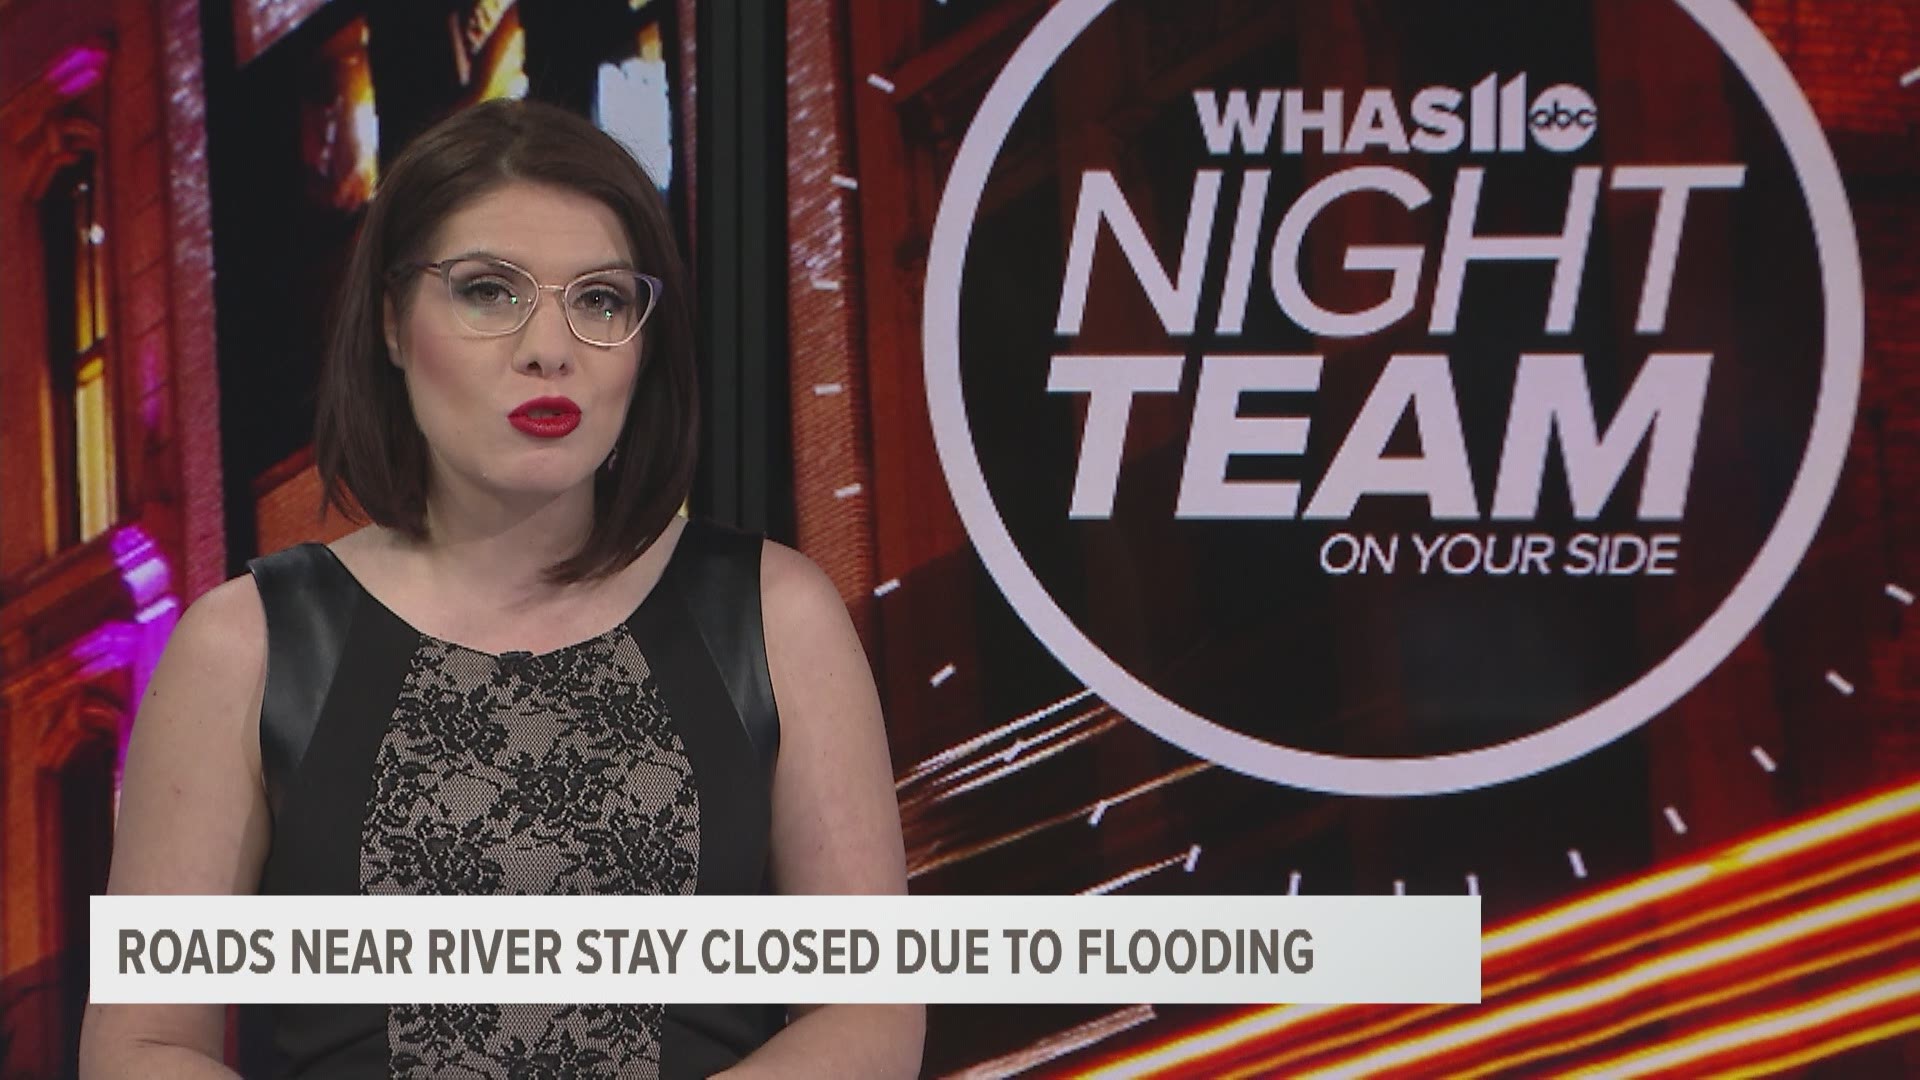 Officials are continuing to monitor flooded areas as the Ohio Rivers begin to recede.